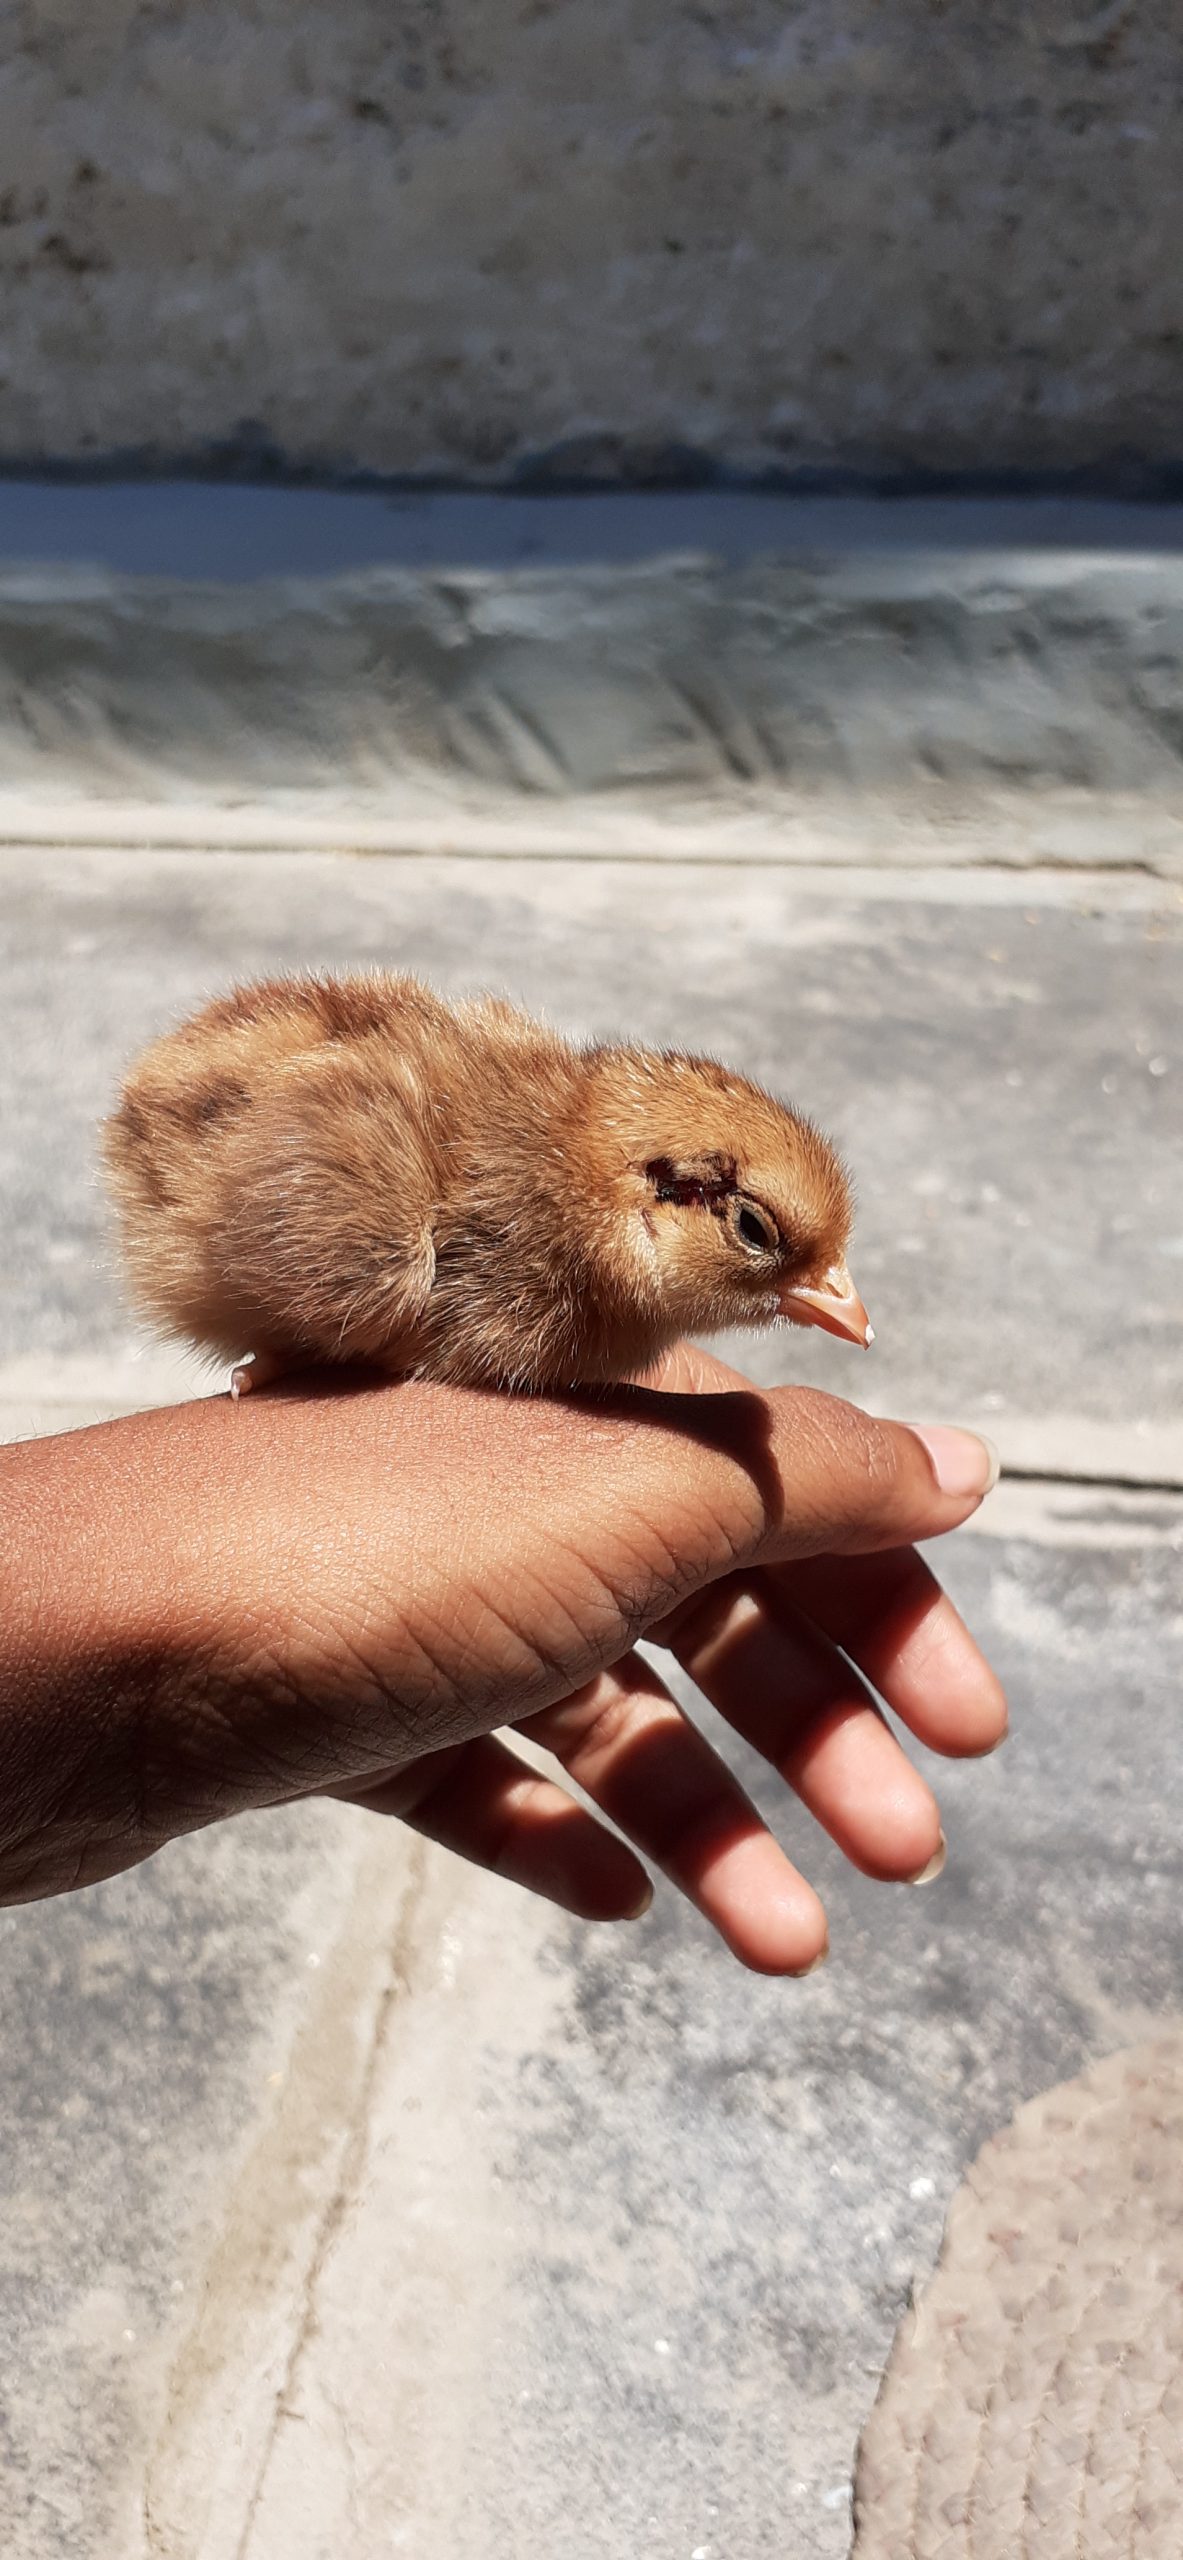 A chick on hand